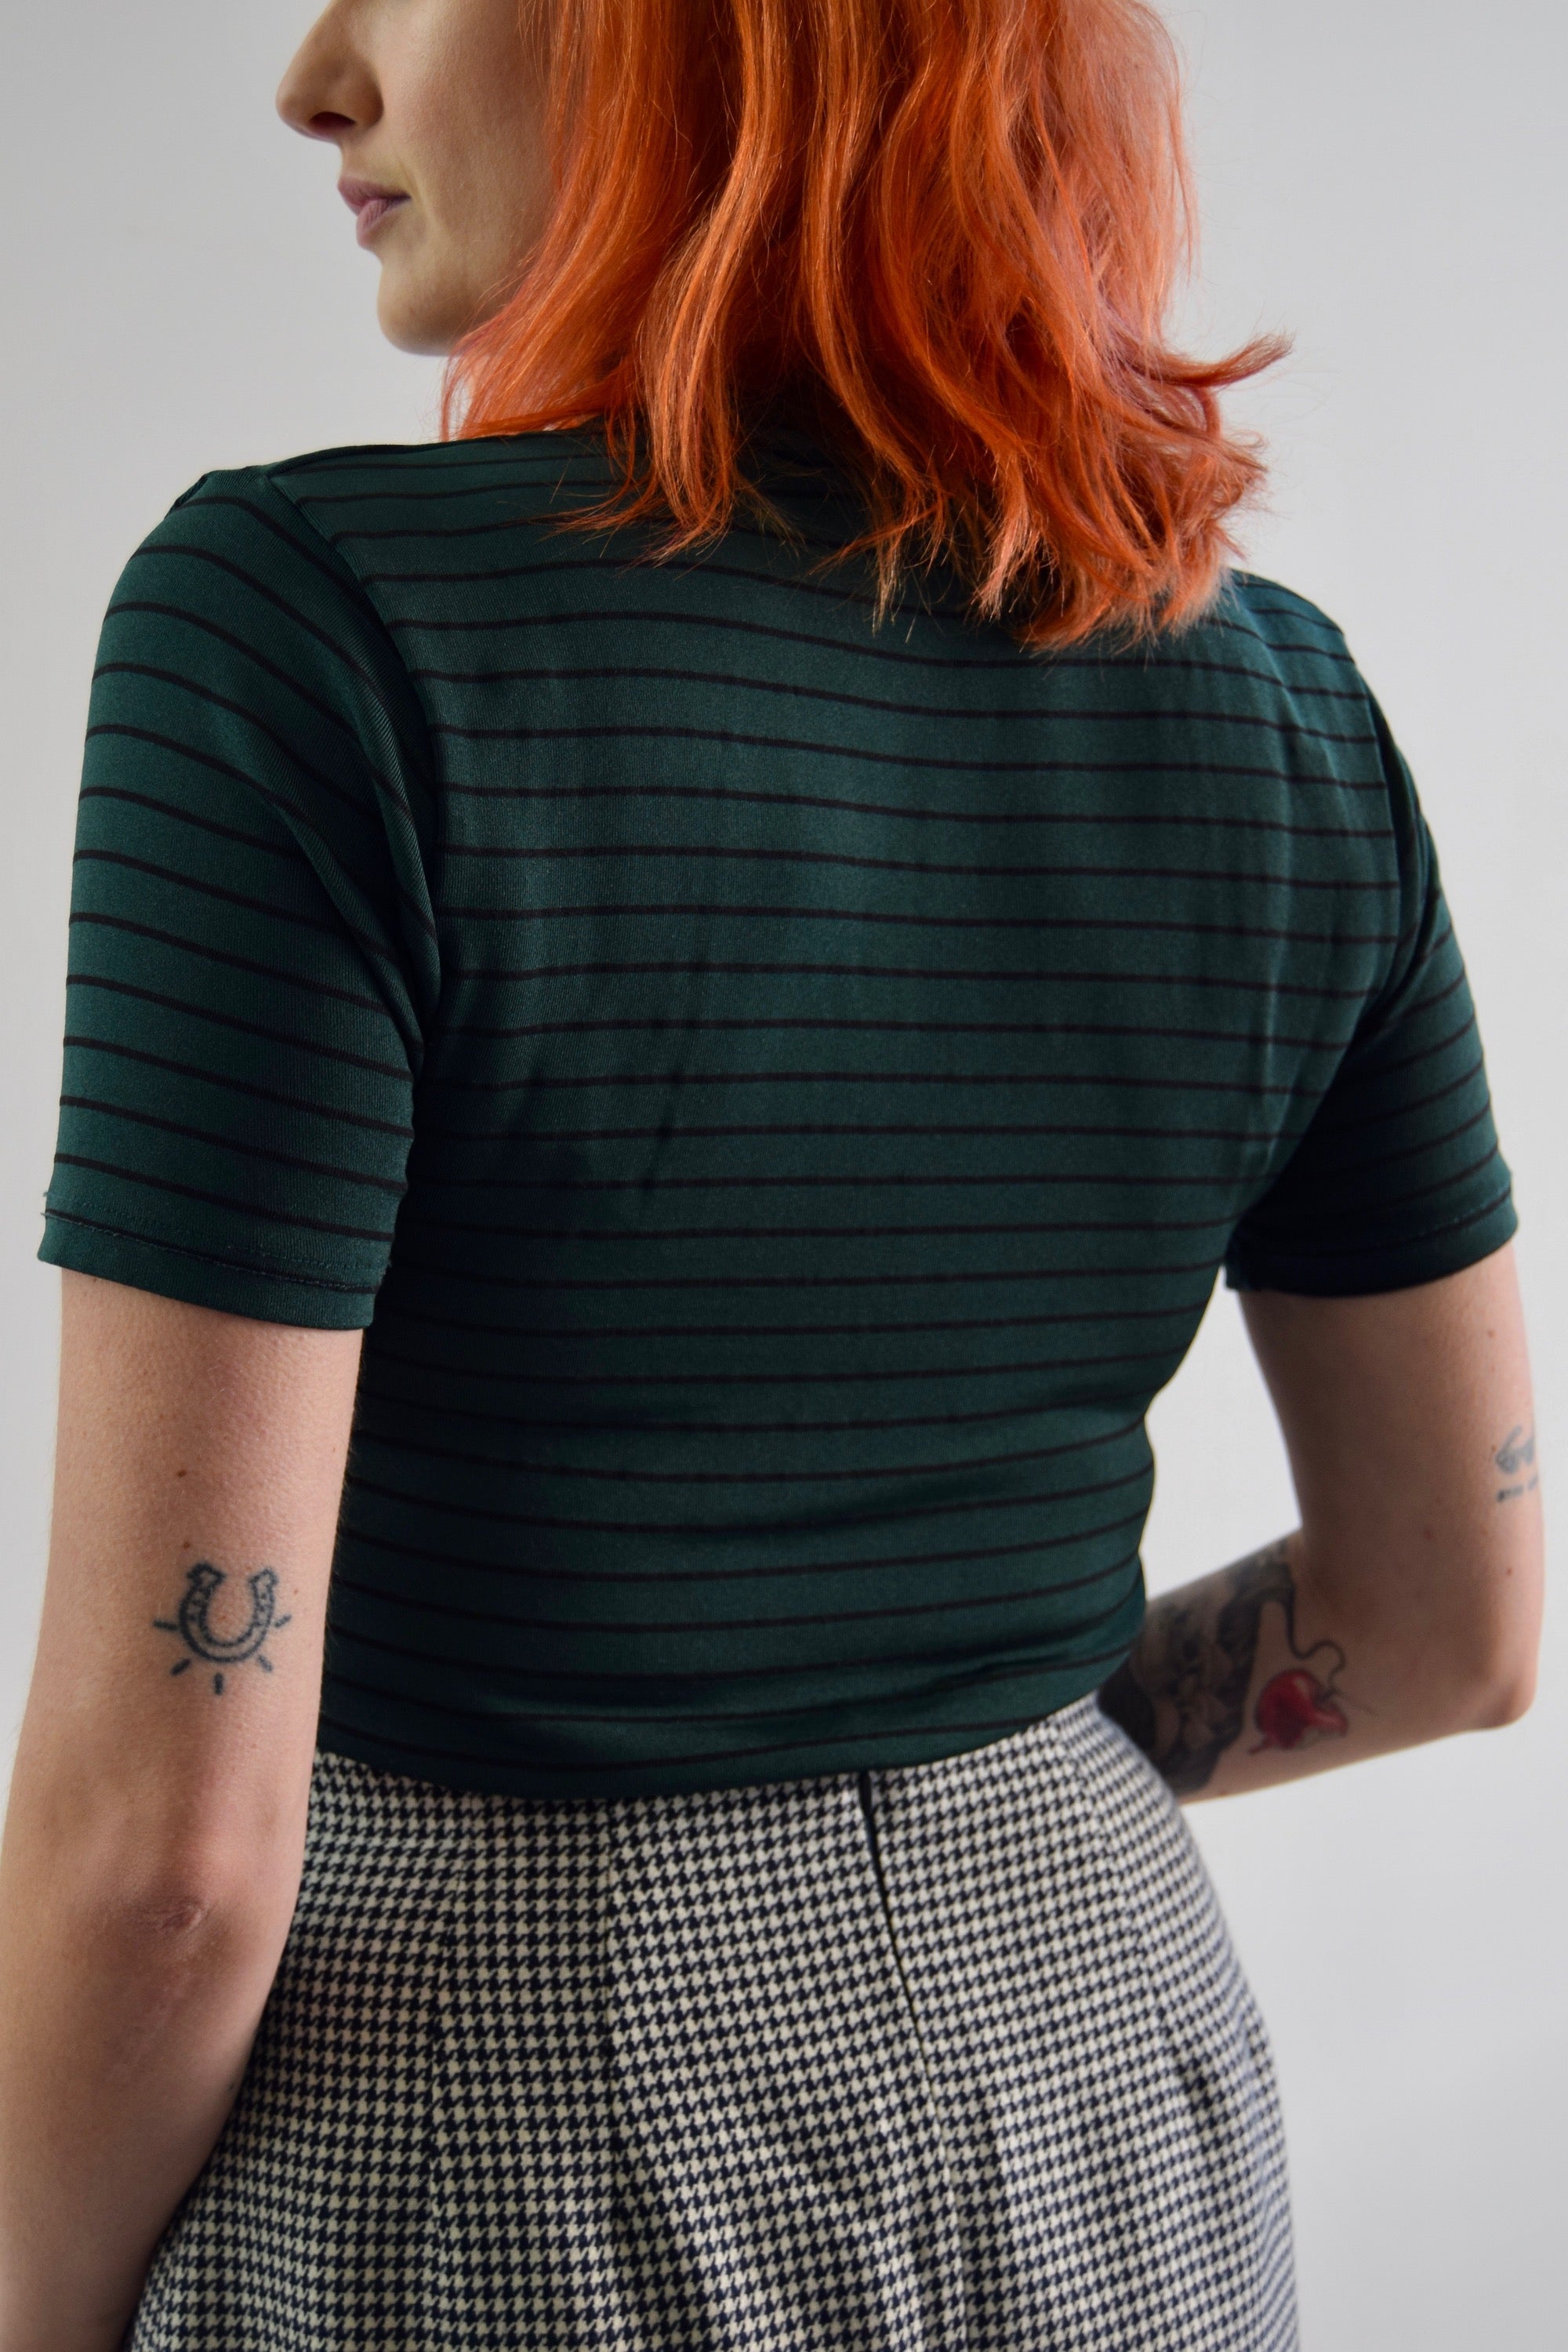 Slinky Green and Black Striped Mock Neck Top